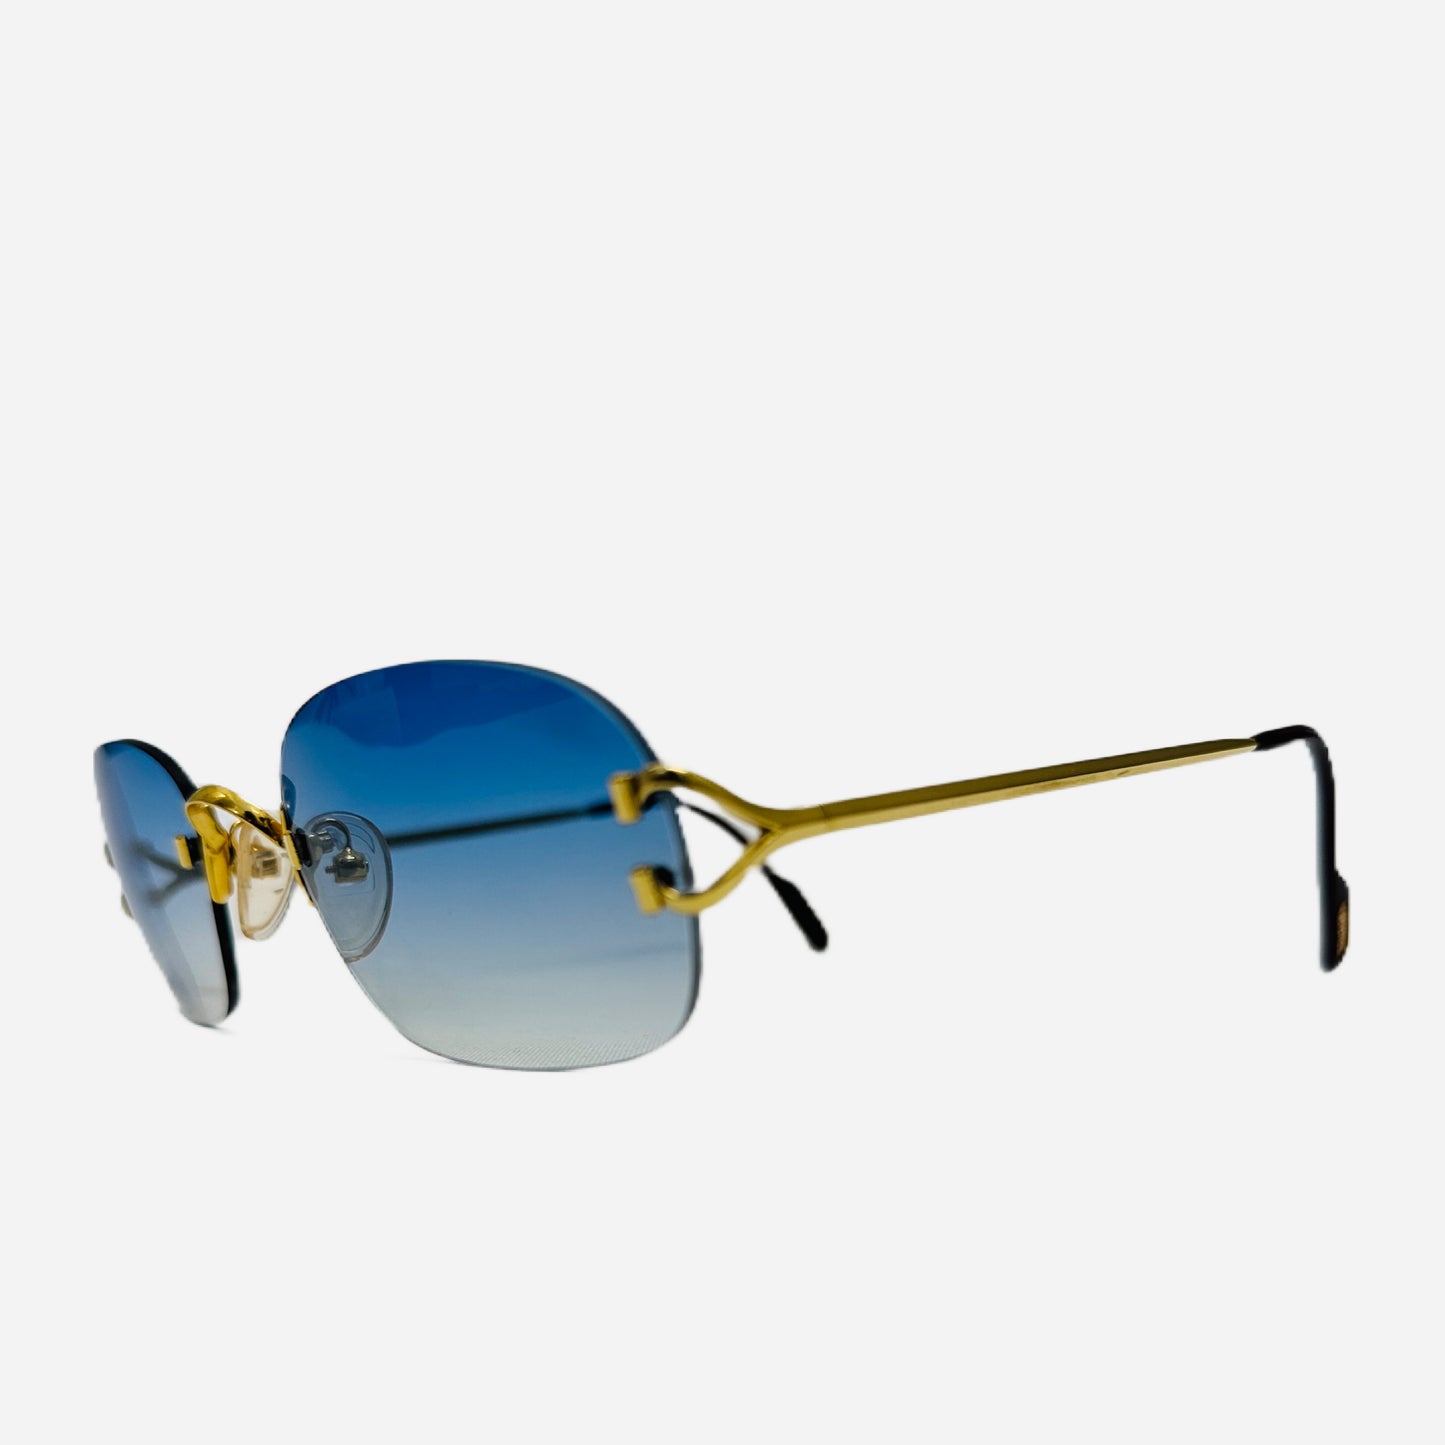 Vintage-Cartier-Big-C-Serrano-Sonnenbrille-Sunglasses-22CT-Carats-Gold-Plated-the-ssekers-dront